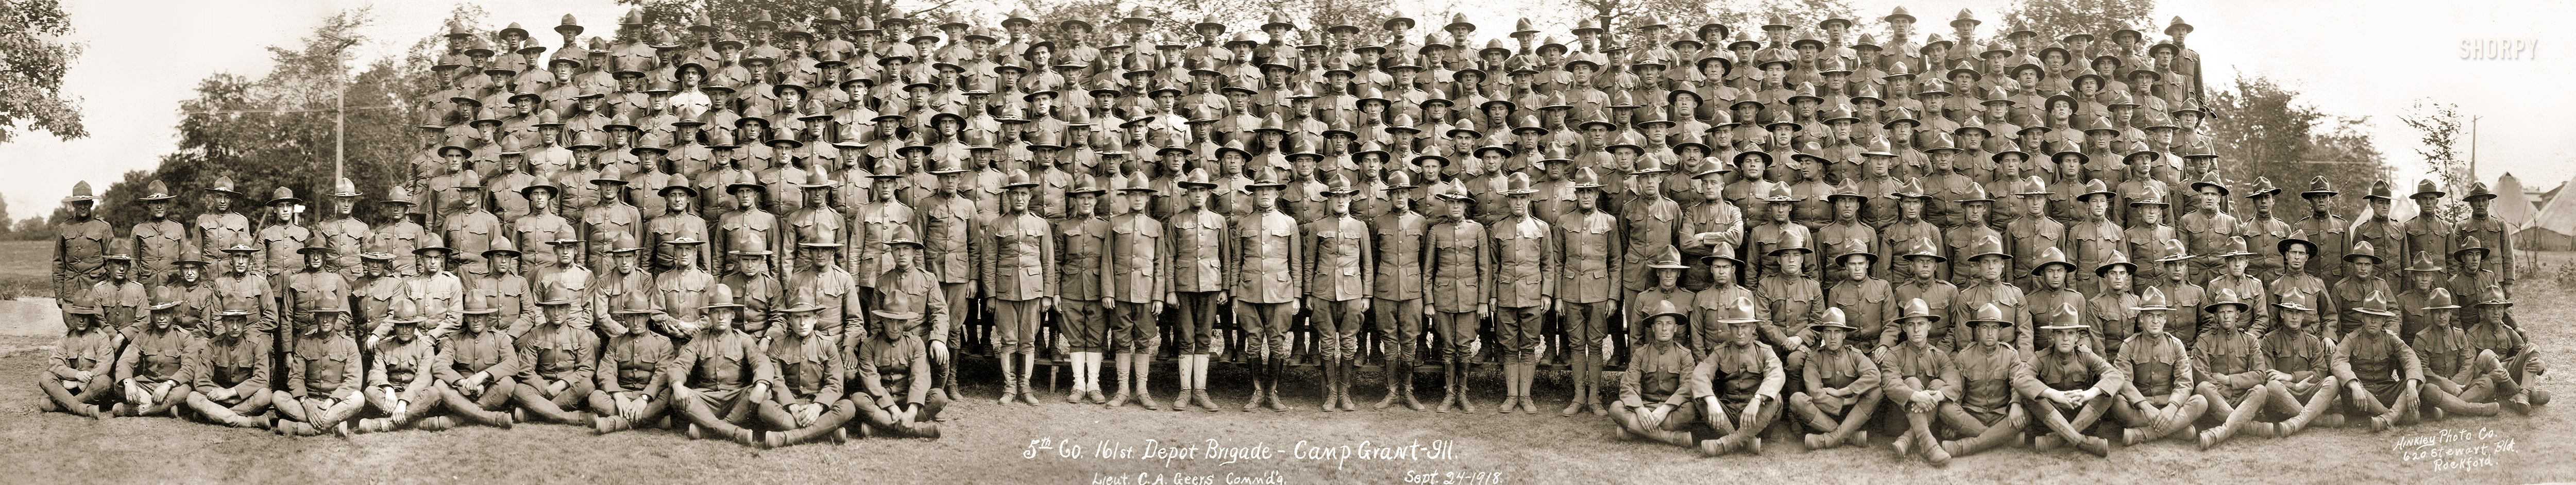 September 24, 1918. "5th Company, 161st Depot Brigade, Camp Grant, Illinois. Lieut. C.A. Geers commanding." Gelatin silver print by Hinkley Photo Co. of Rockford. View full size.